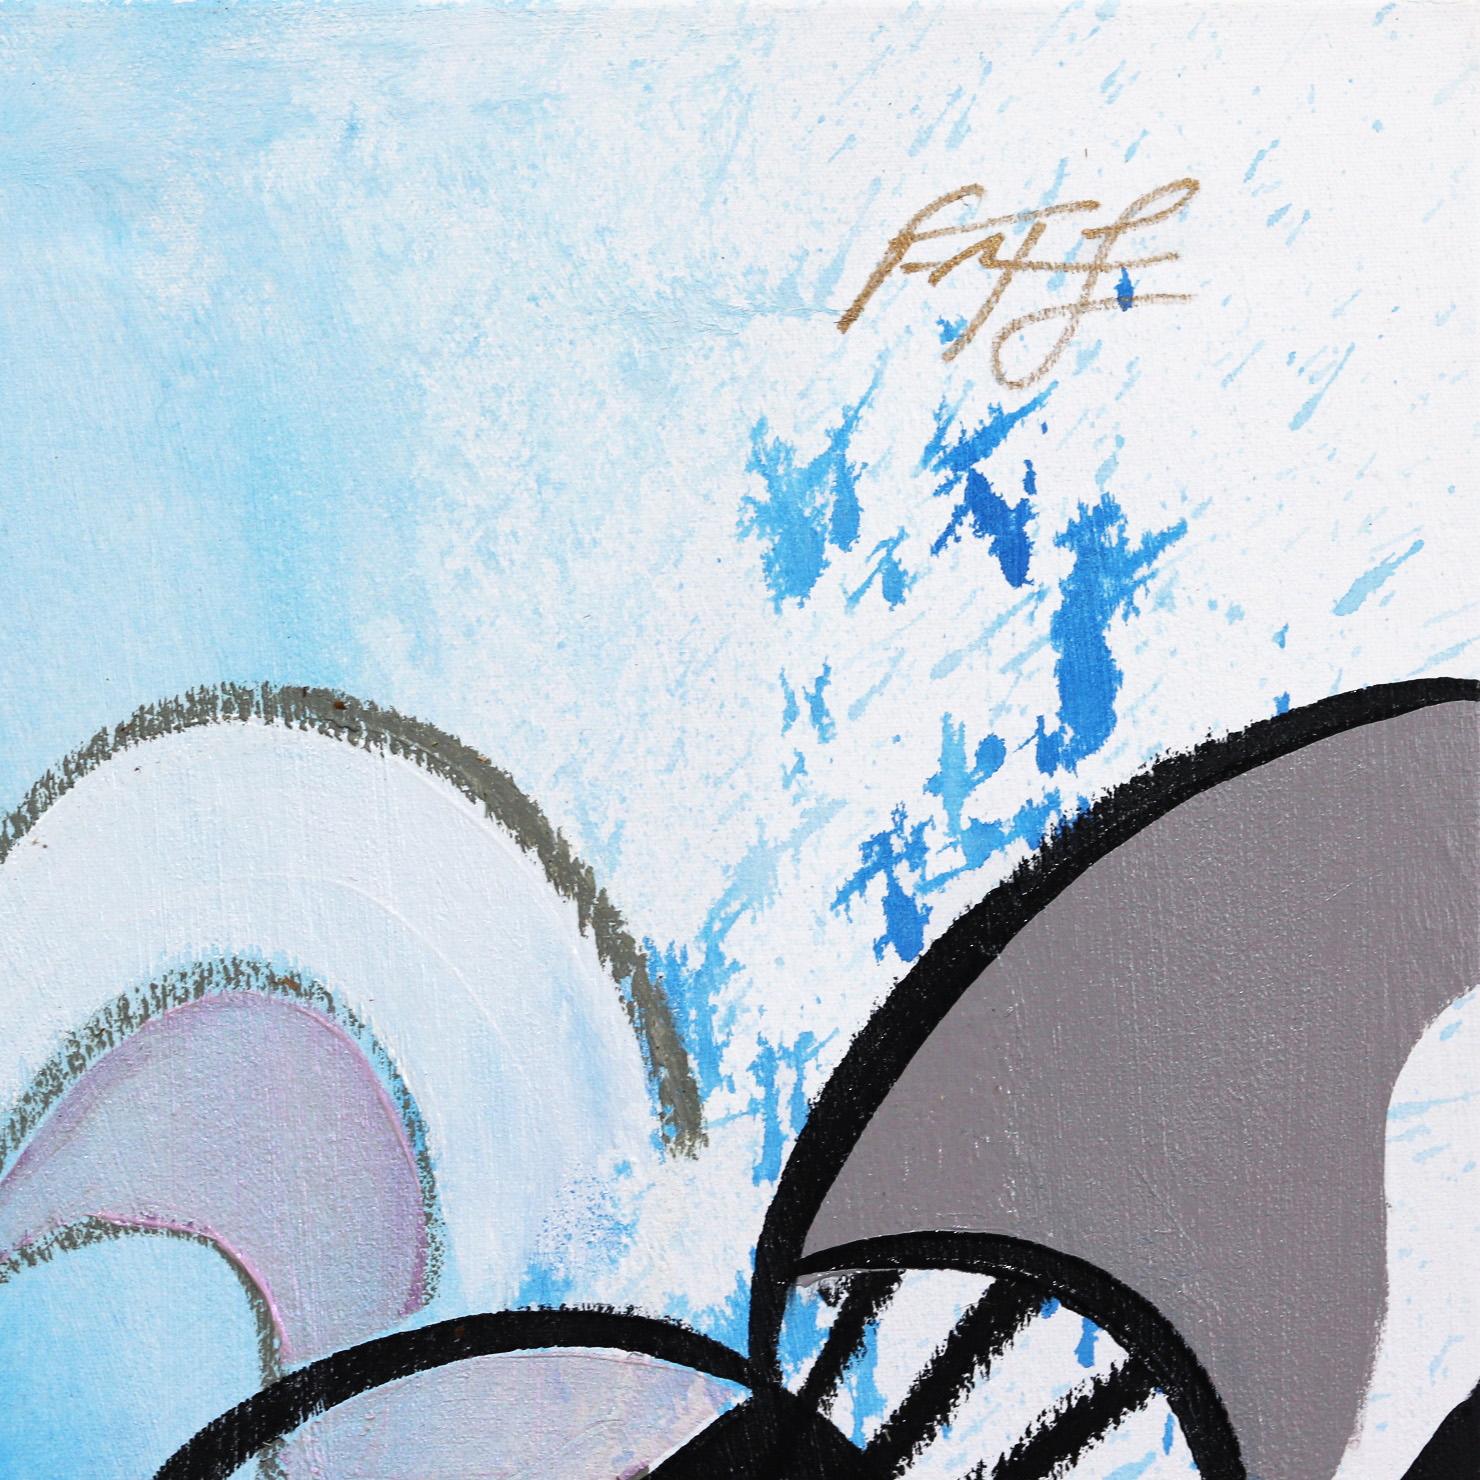 Splish Splash - Original Graffiti Style Painting Mixed Media on Canvas - Blue Abstract Painting by Frankie Alfonso